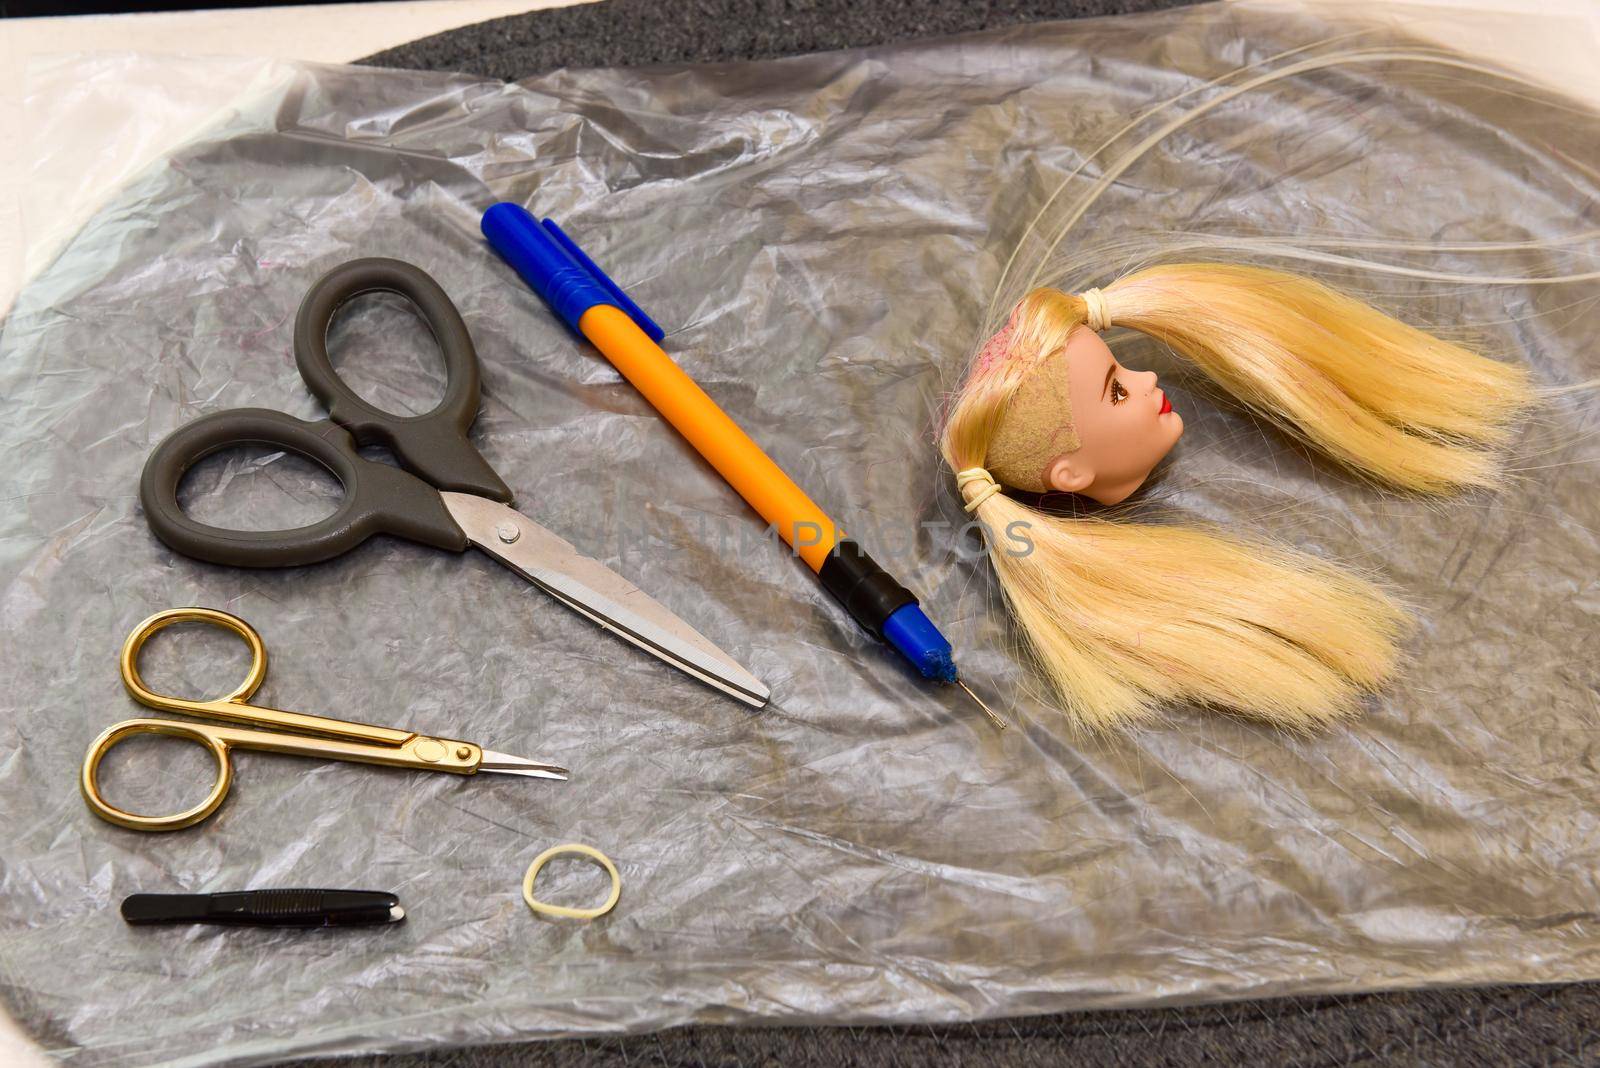 scissors and homemade tool on the table, how to make hair for a doll, hobby concept by karpovkottt